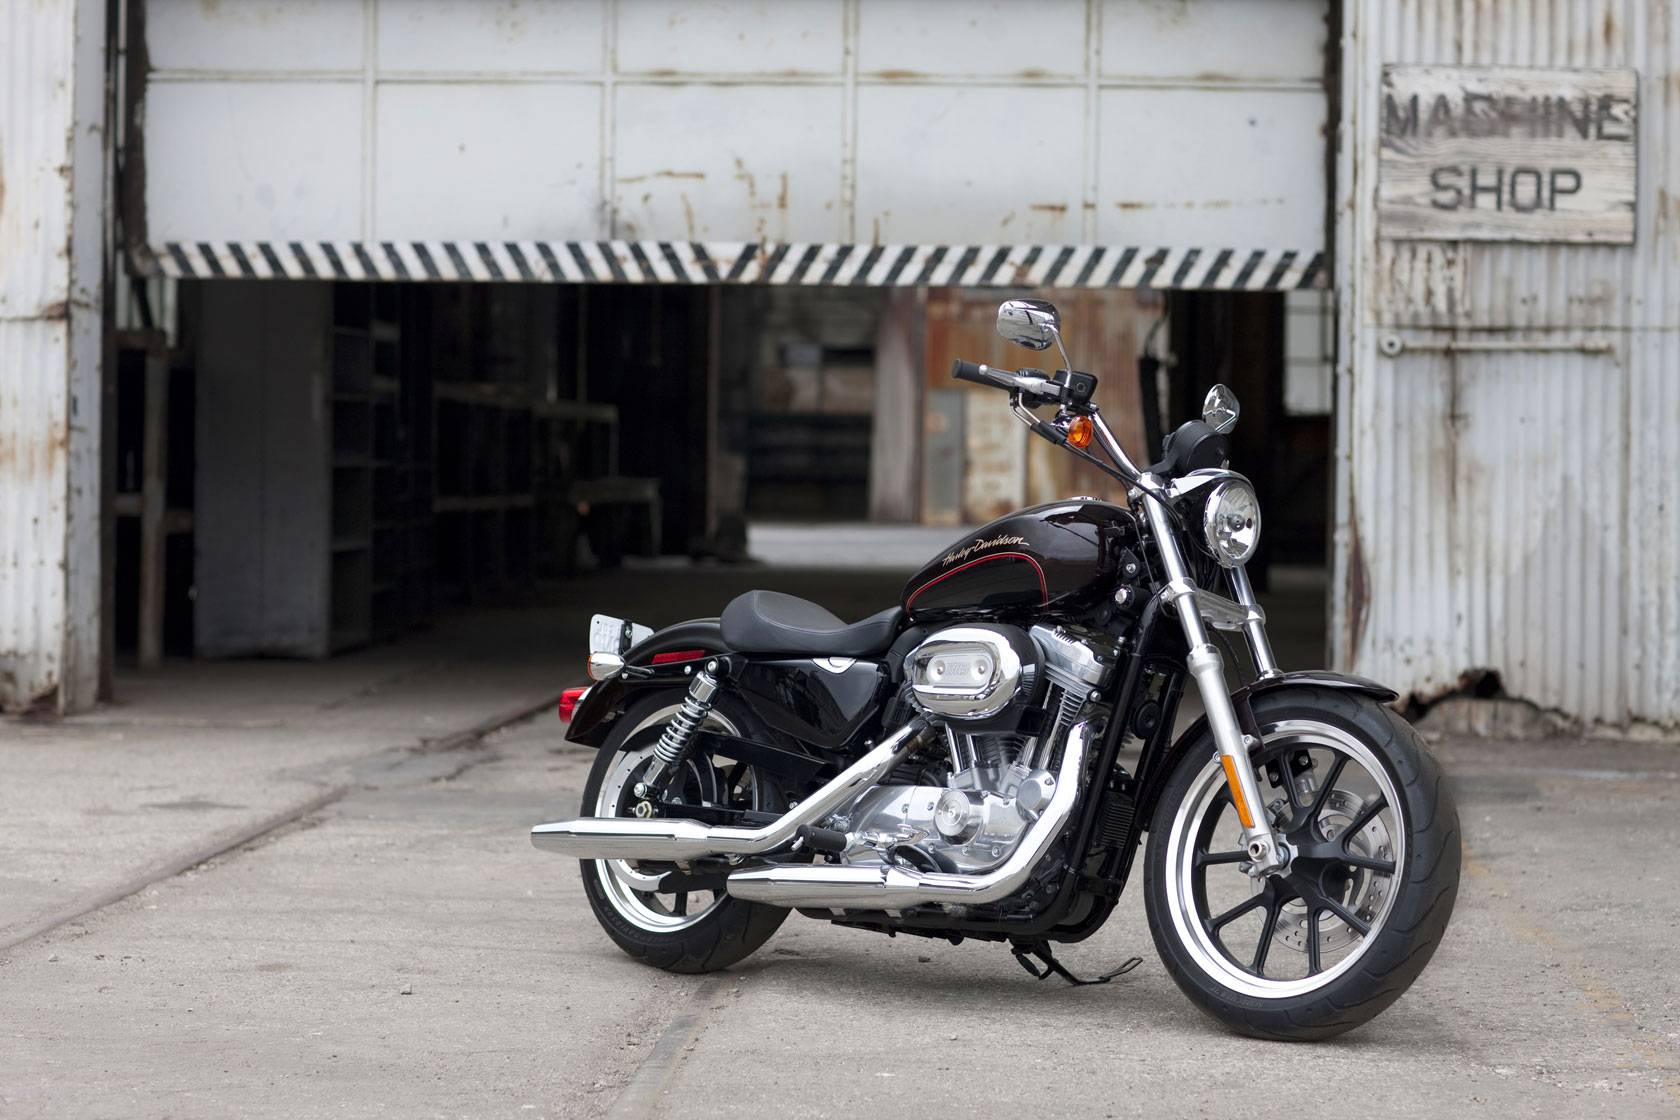 Harley Davidson Sportster 5 Photo, Image, Picture and wallpaper